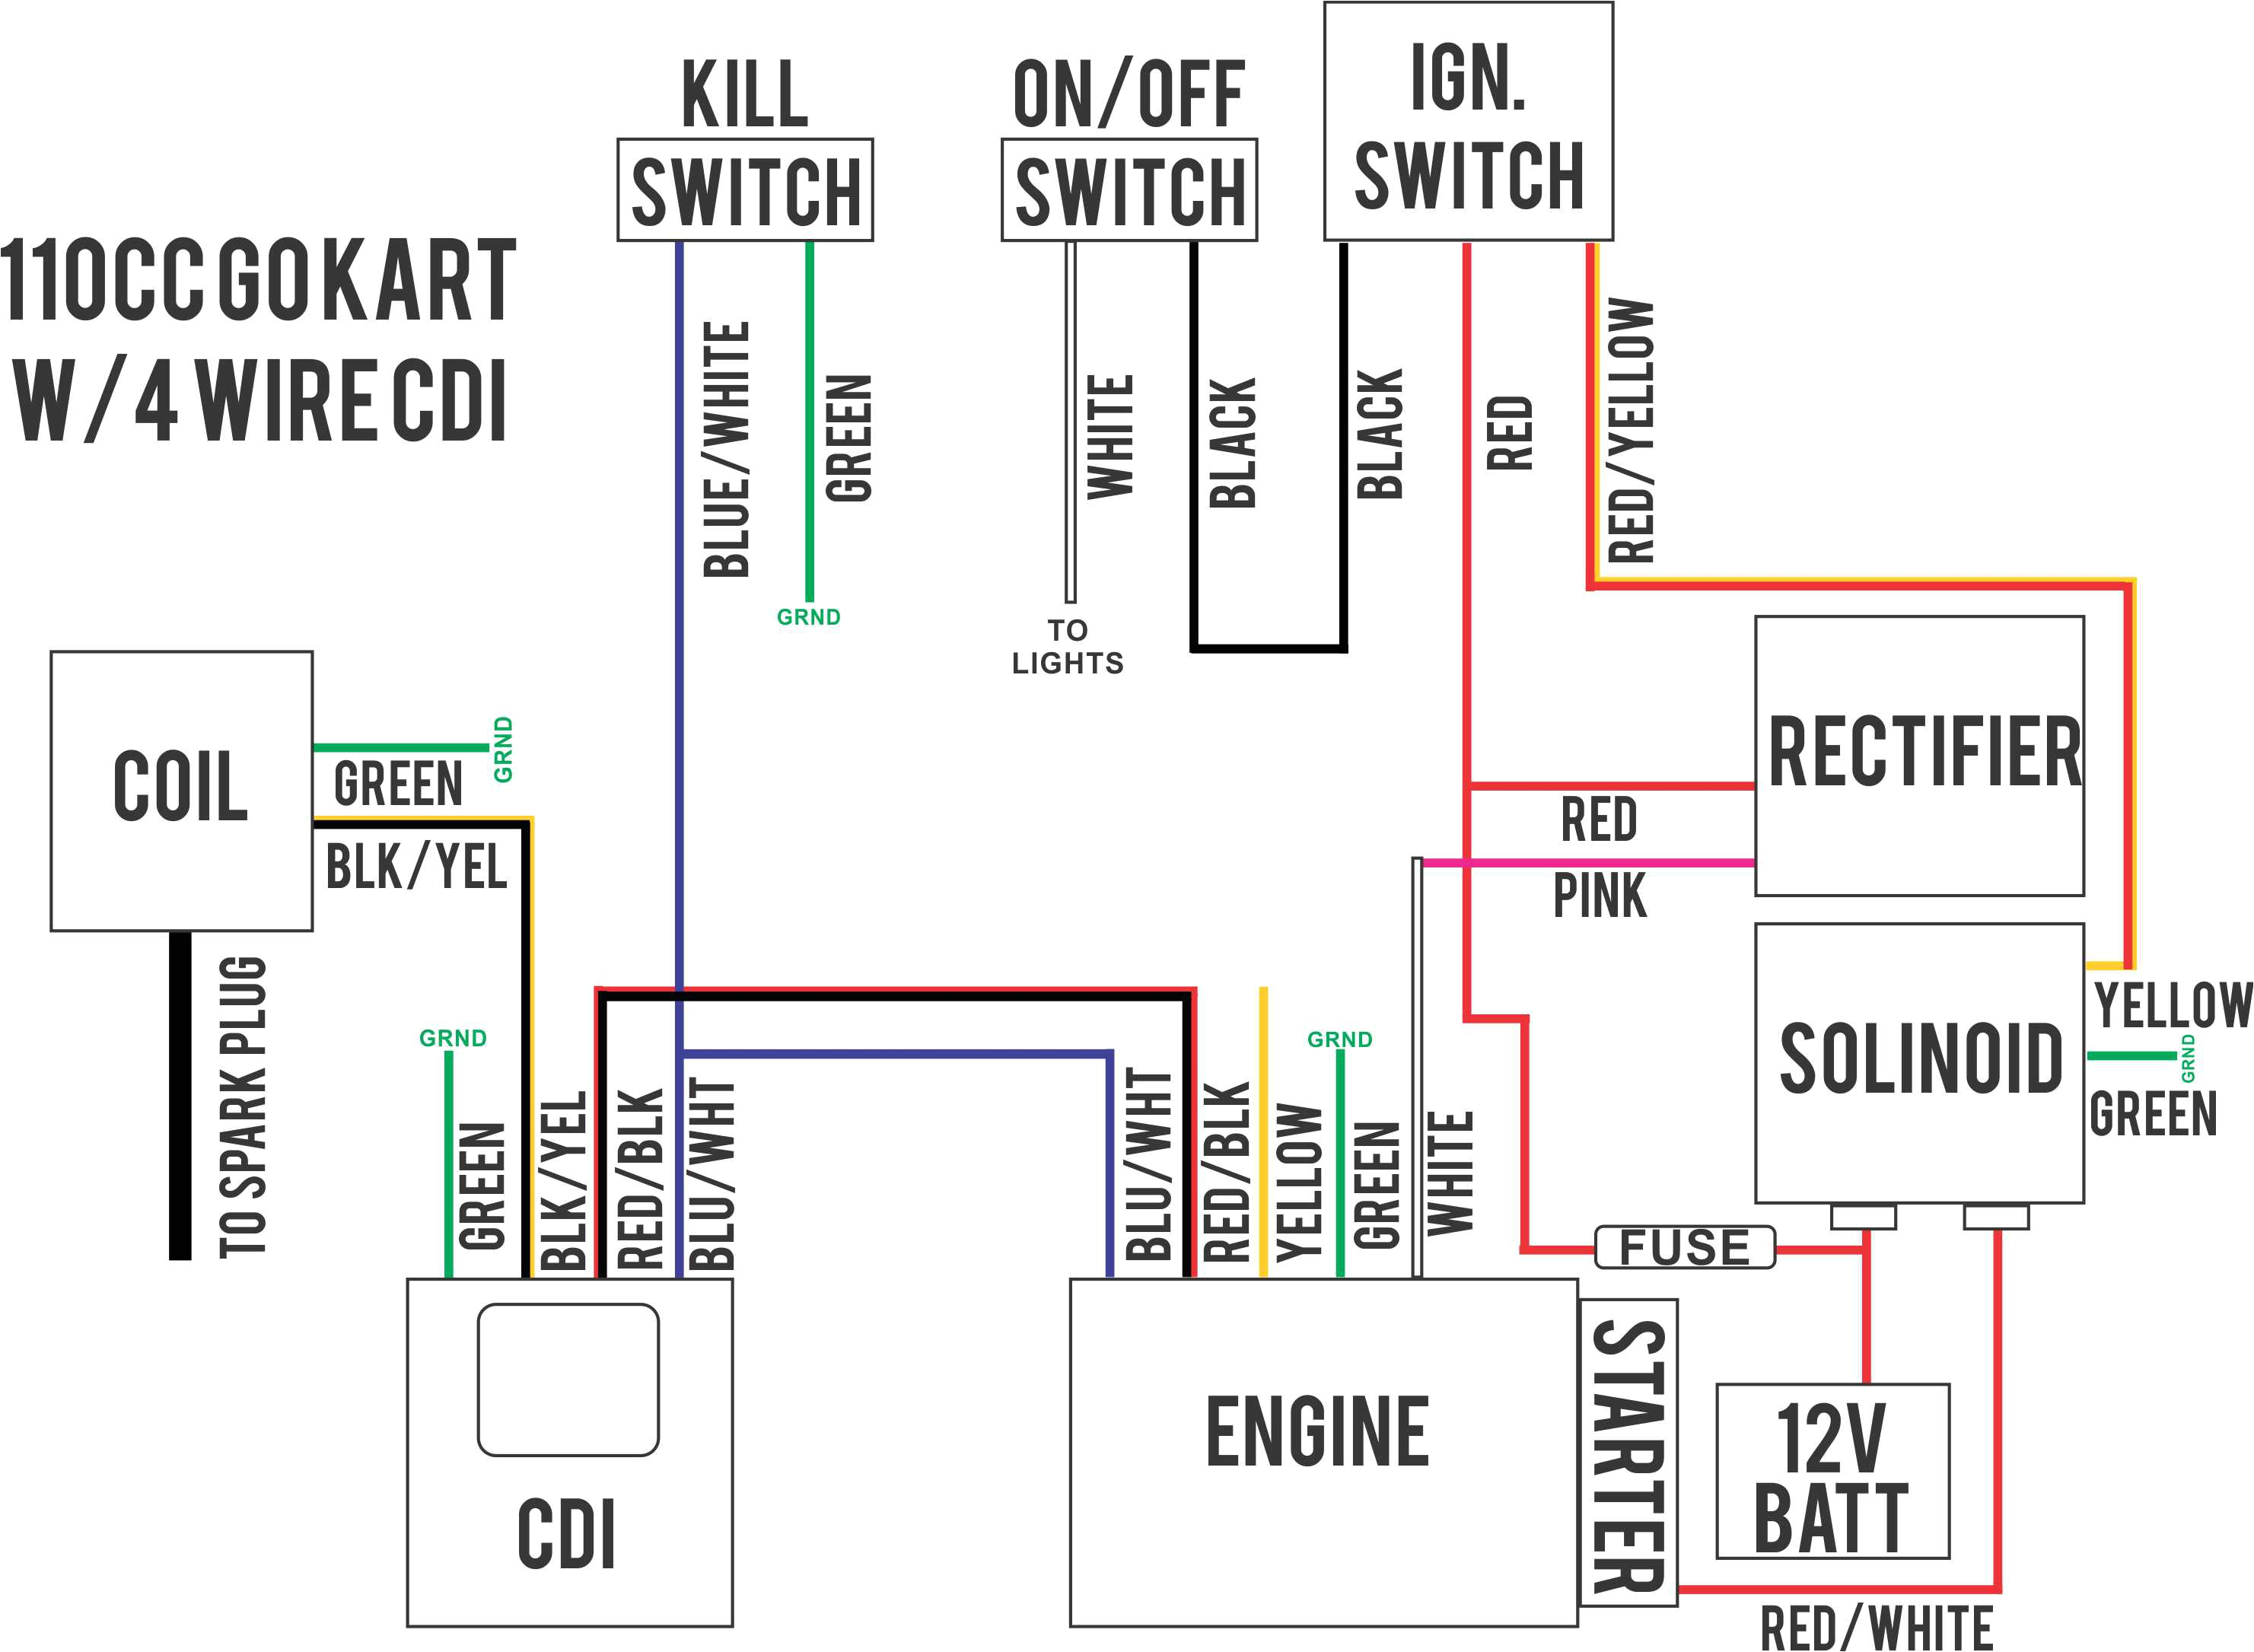 49cc scooter cdi wiring diagram my wiring diagram qingqi 49cc scooter wiring diagram 49cc scooter cdi